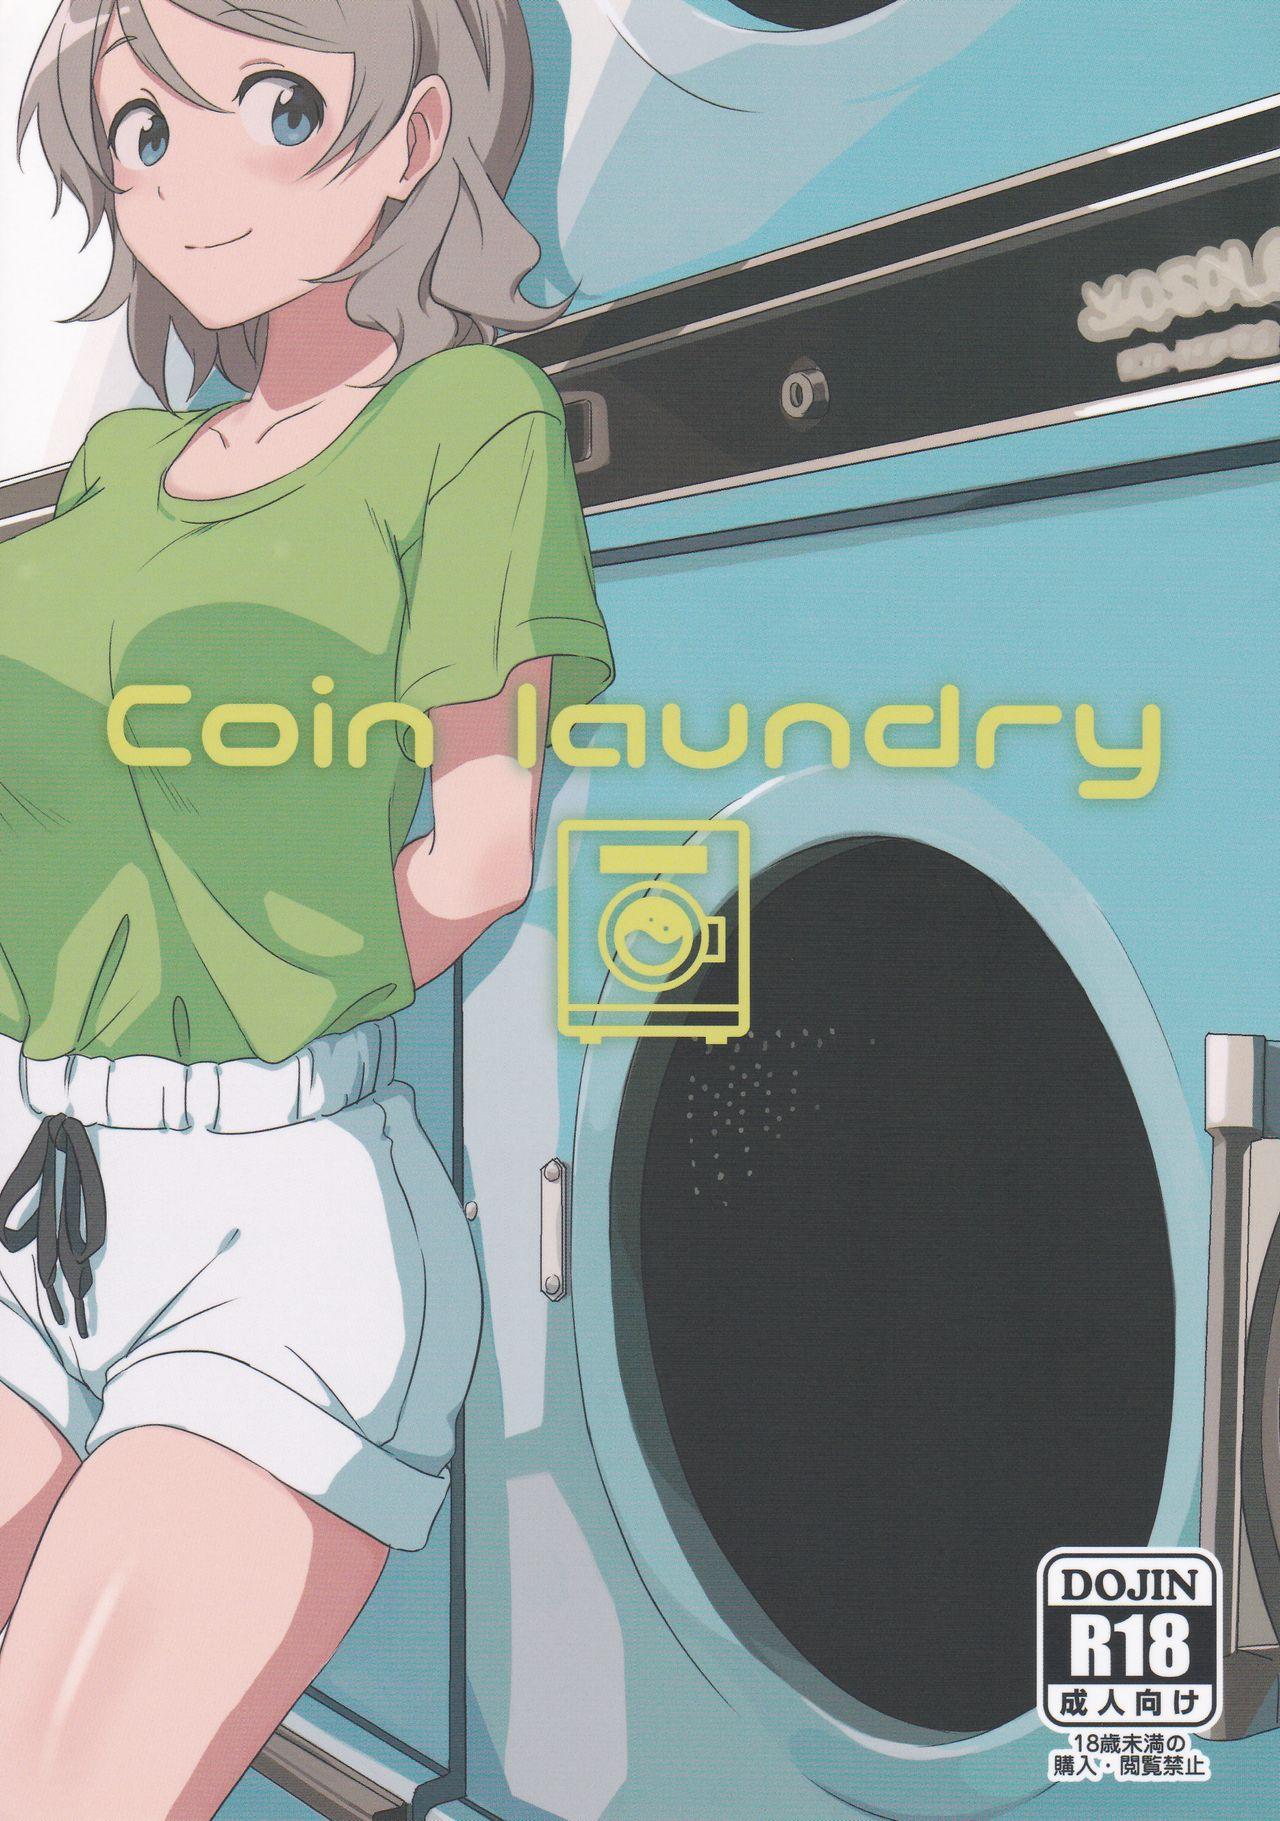 Coin laundry 0